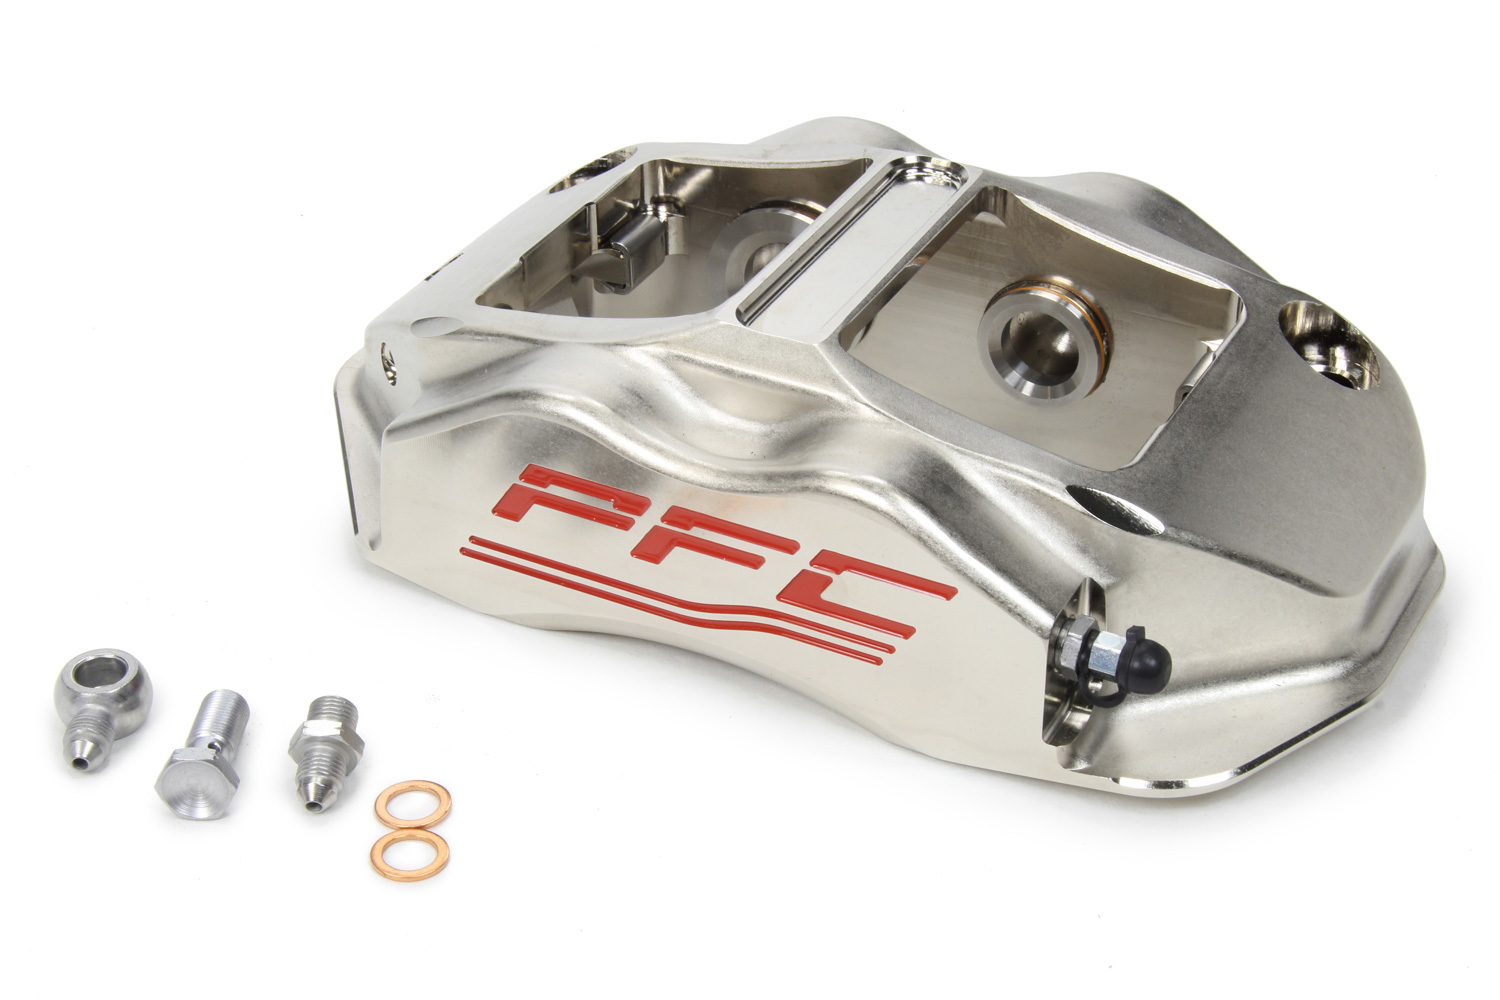 PFC Brakes 94.323.410.440.12 Brake Caliper, ZR94, Passenger Side, Trailing, 4 Piston, Aluminum, Nickel Plated, 12.716 in OD x 1.250 in Thick Rotor, 7.00 in Radial Mount, Each